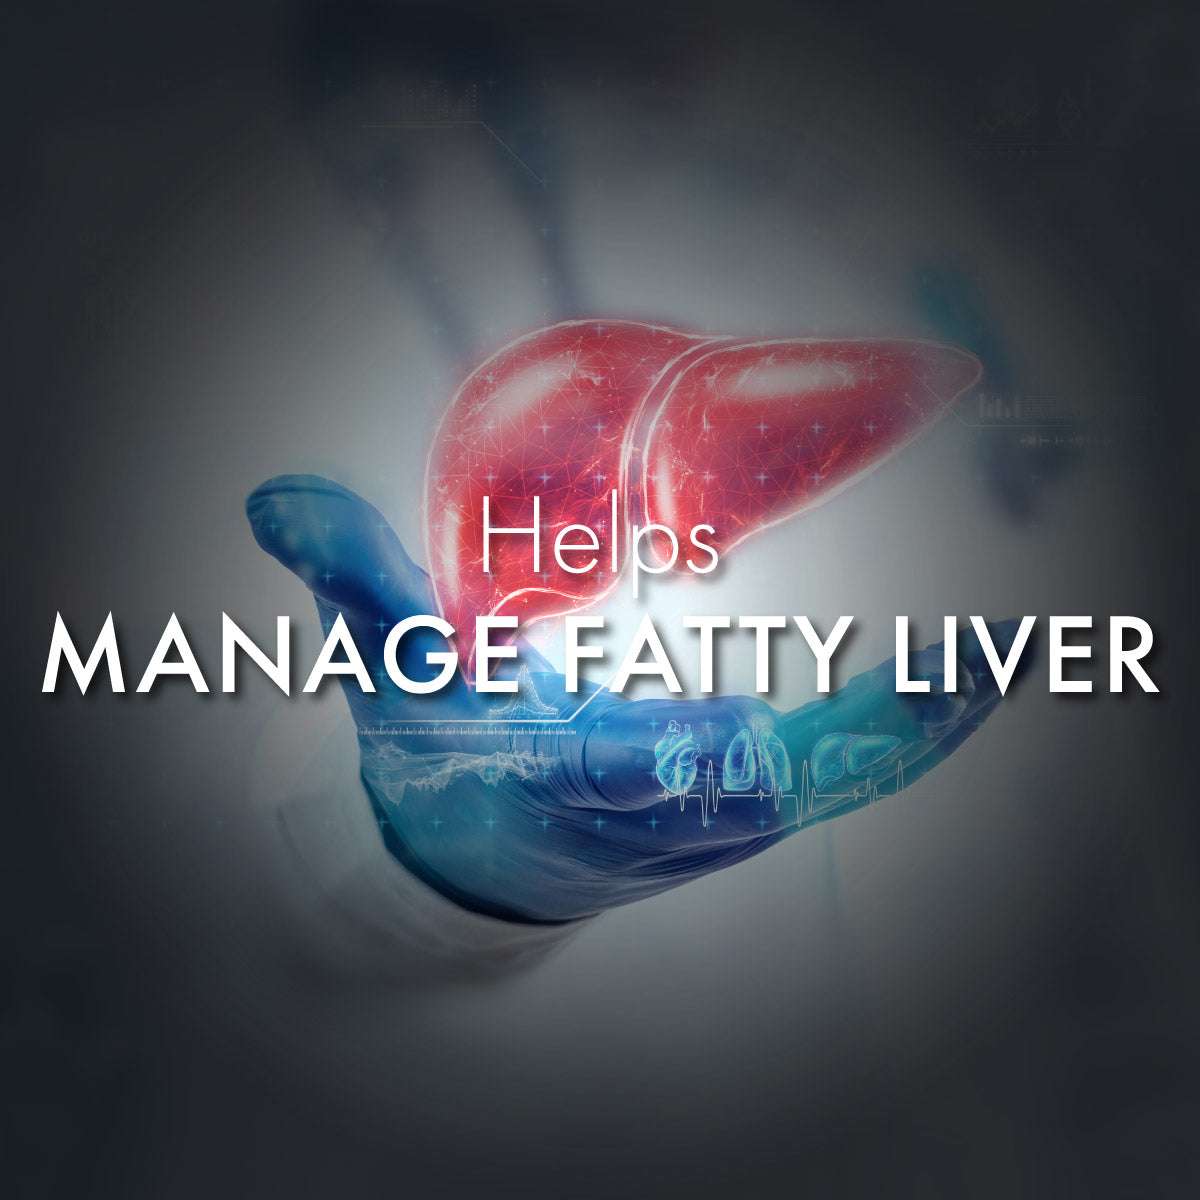 Dr. Vaidya's Liver Care: Helps In Fatty Liver & Daily Liver Detox